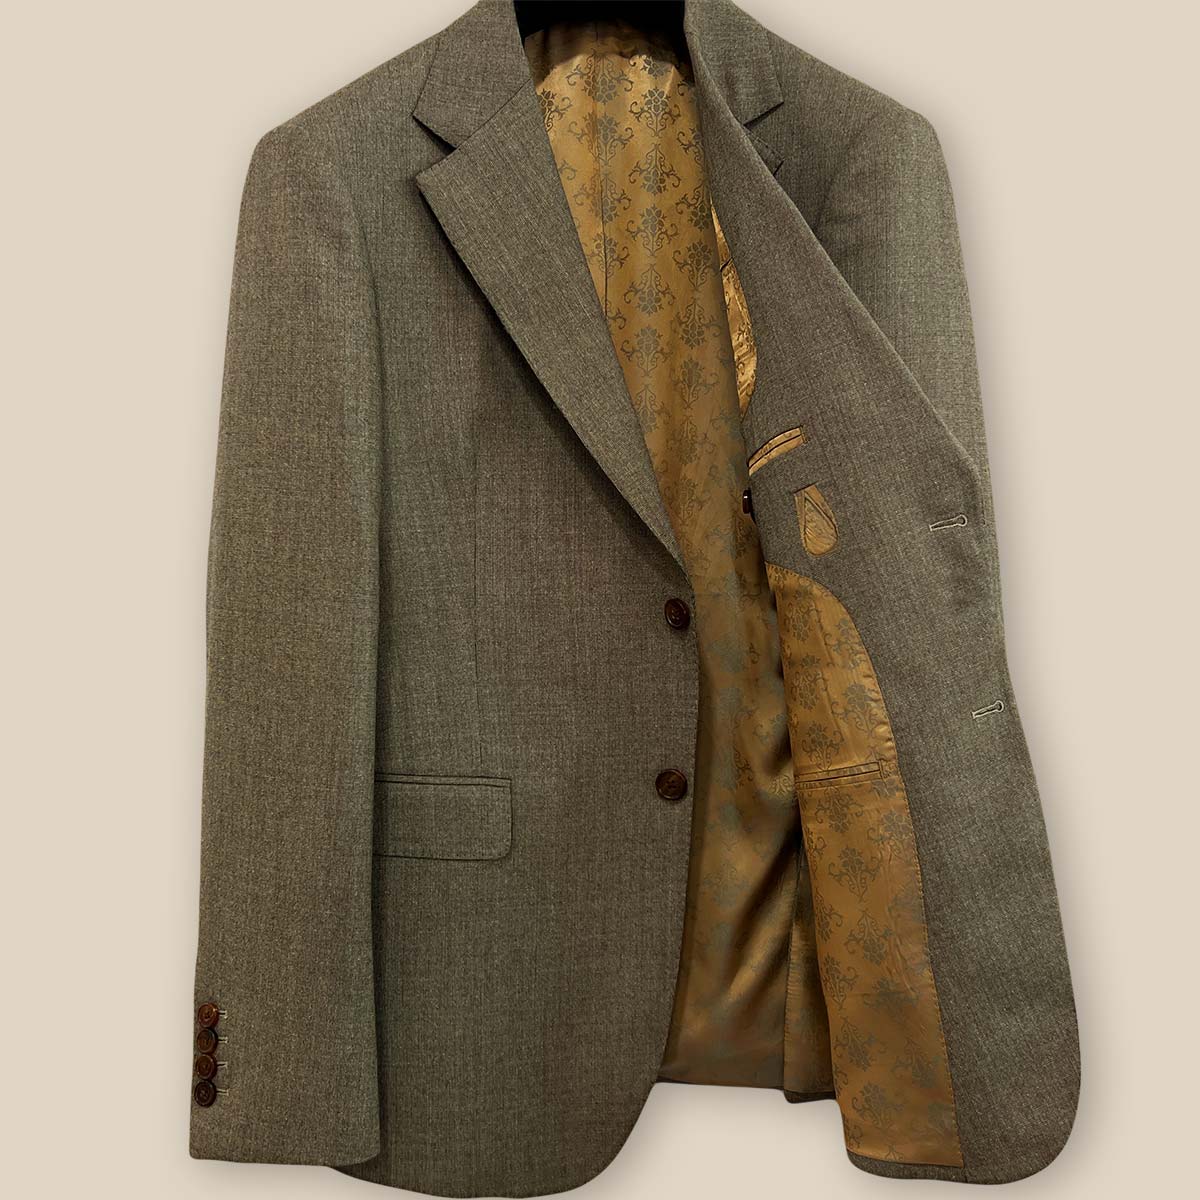 Inside view of the left side of the Westwood Hart brown nailhead men's suit jacket, revealing the gold patterned lining and interior pockets.